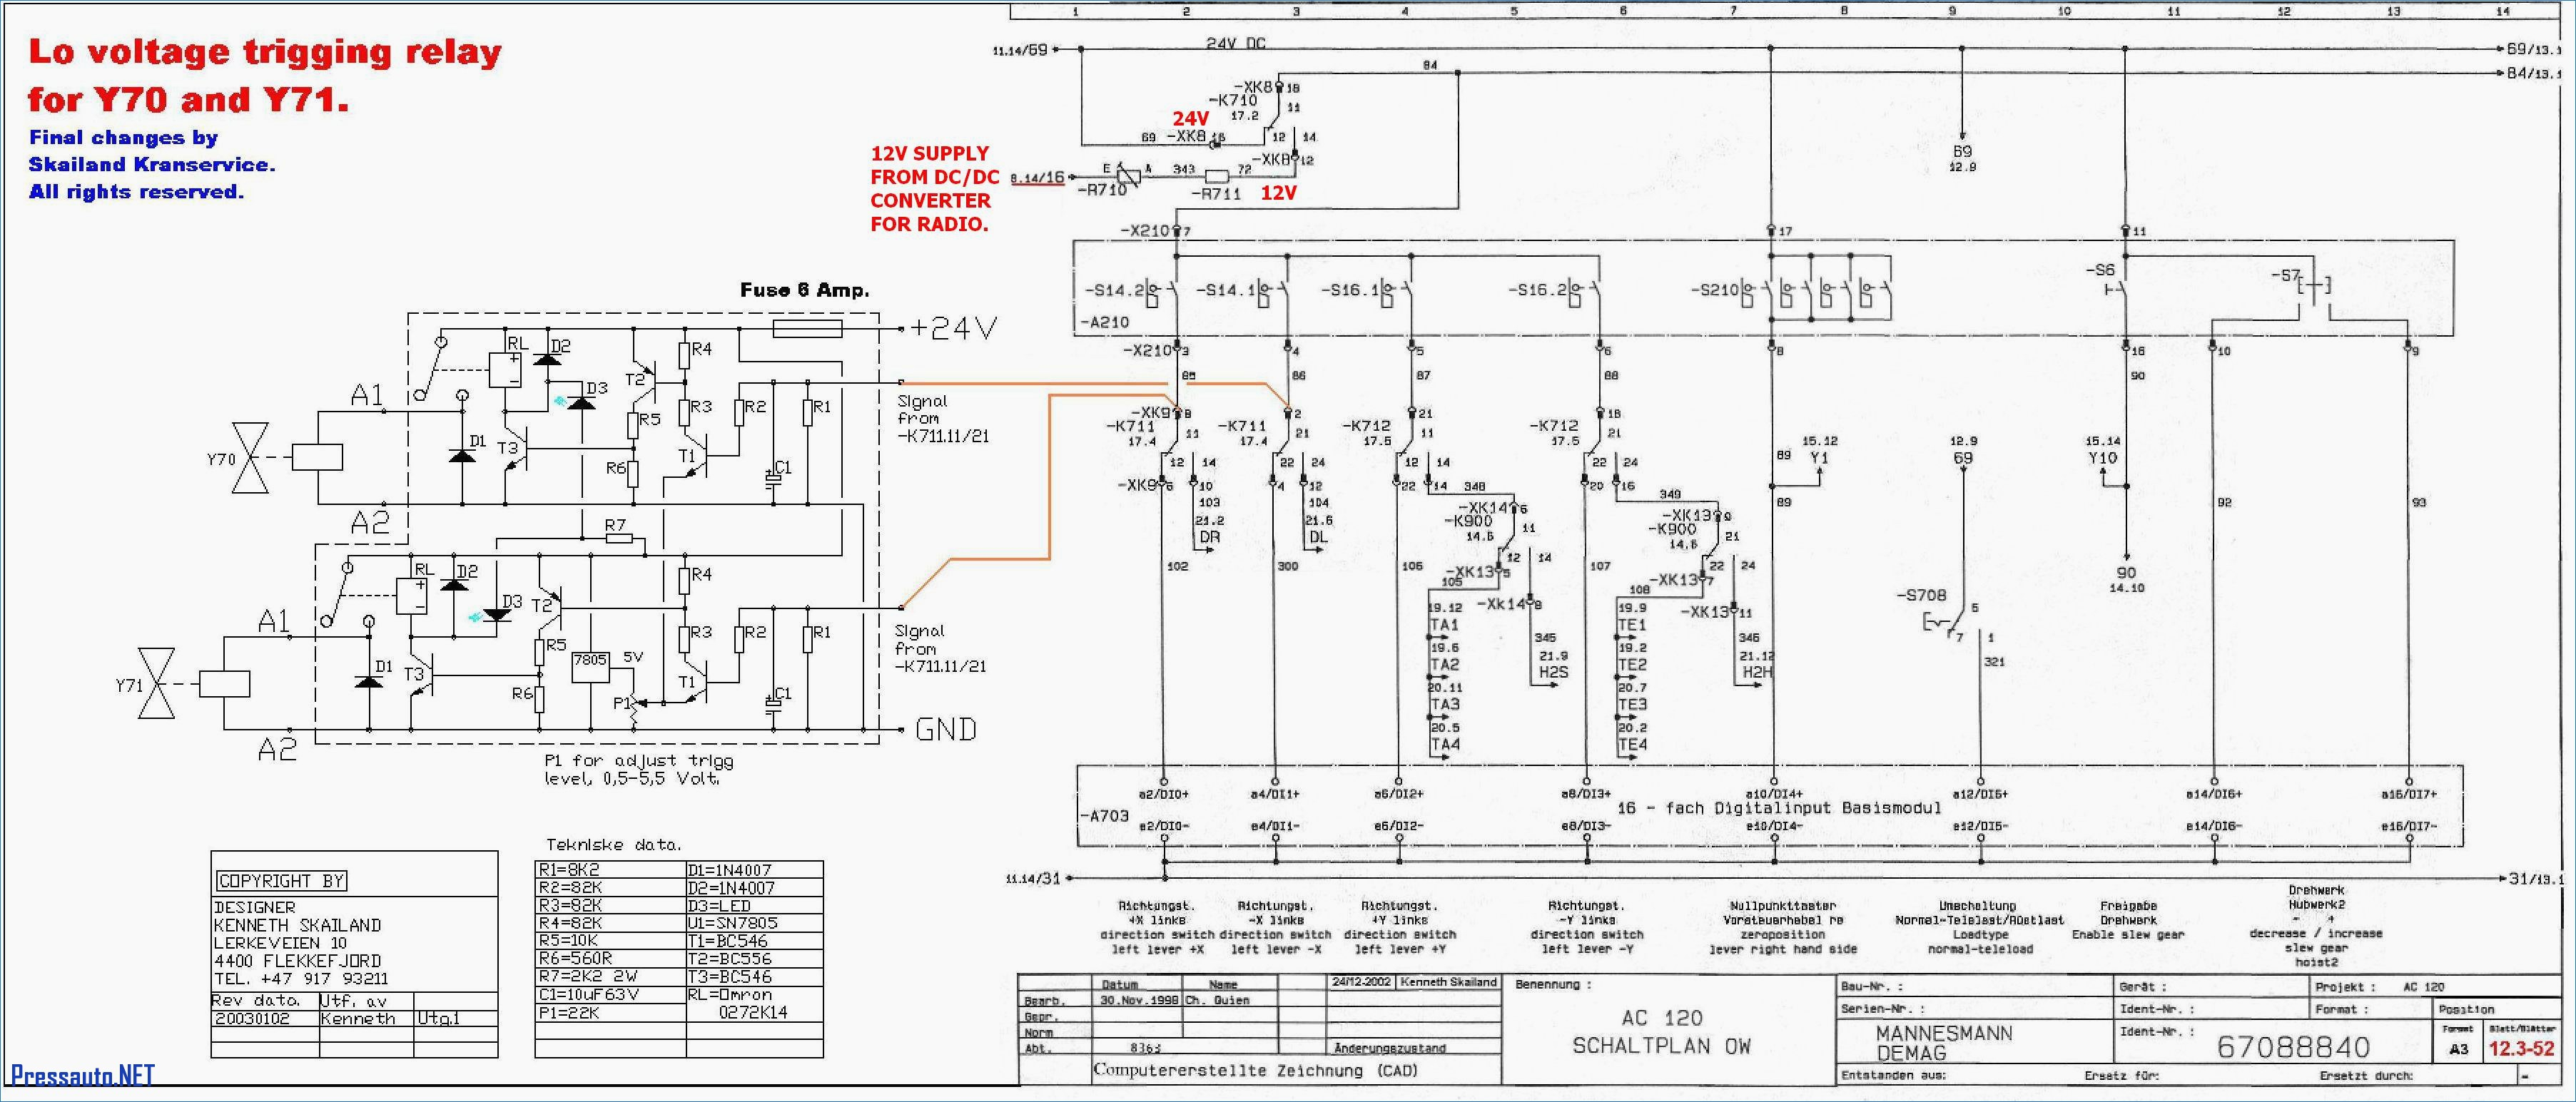 Abb Vfd Wiring Diagram Collection - Wiring Diagram Sample